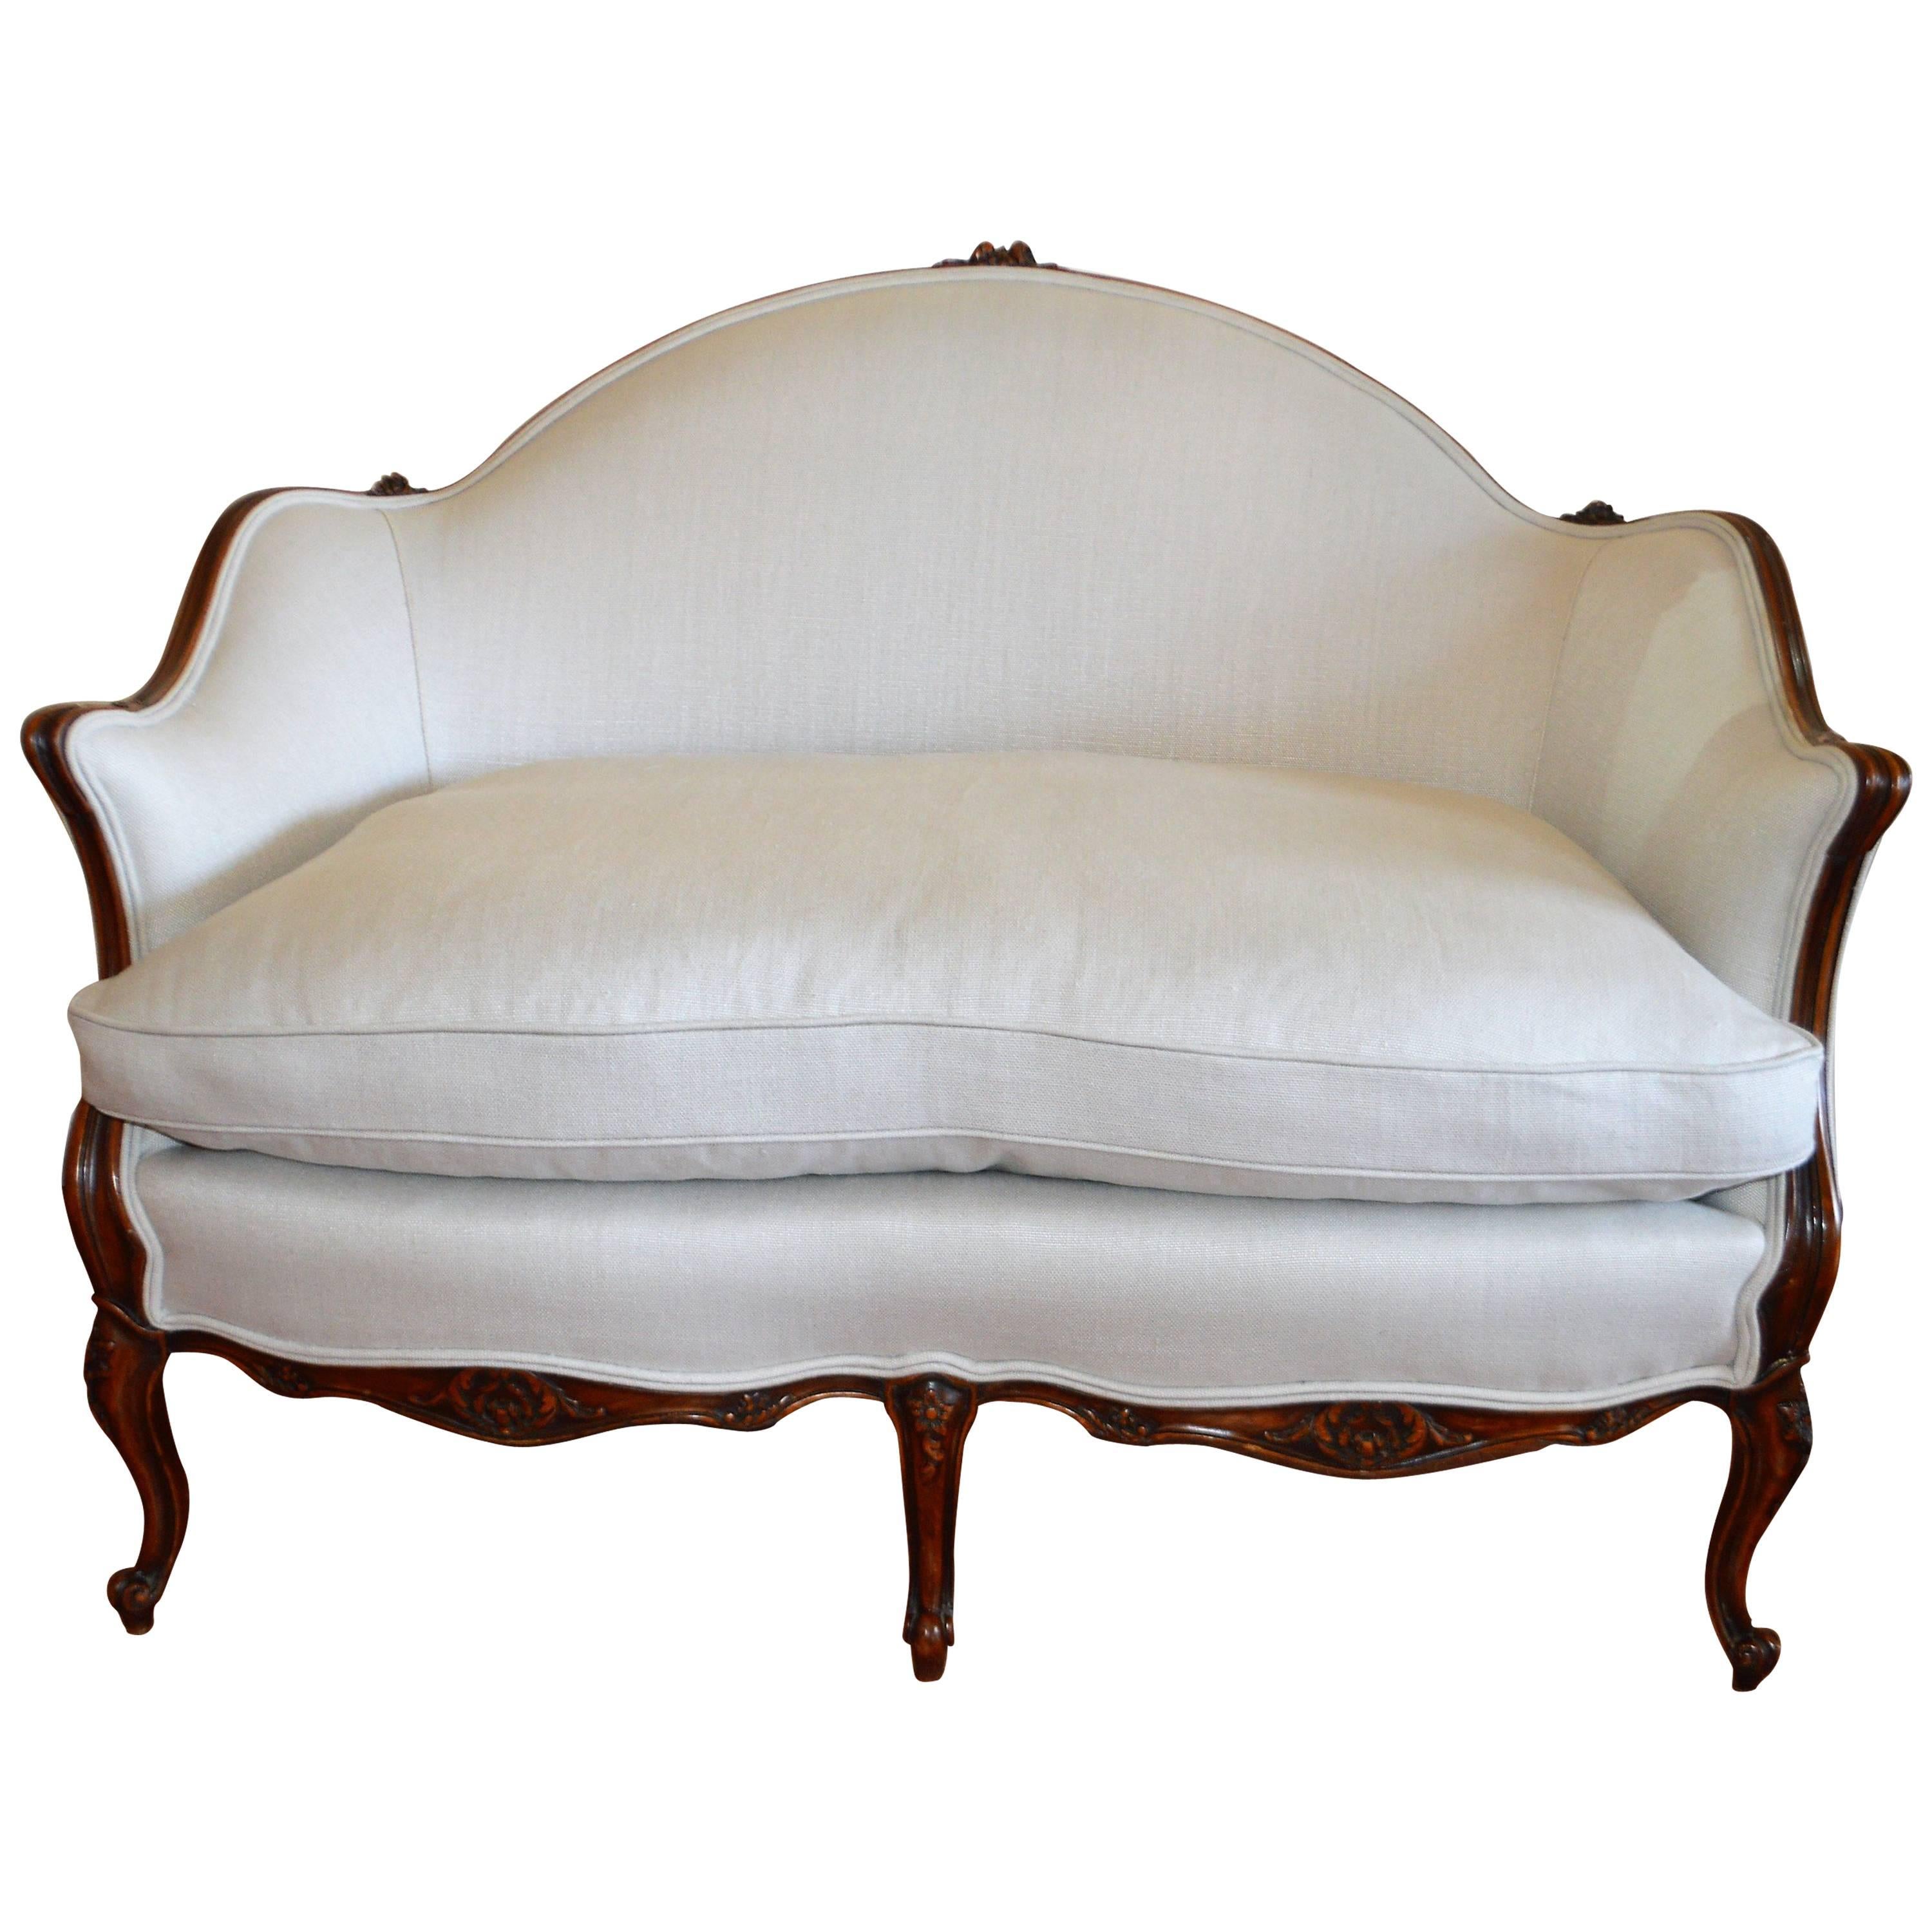 Louis XV Style Walnut Canape Newly Upholstered in Grey Linen Fabric, Dawn Seat